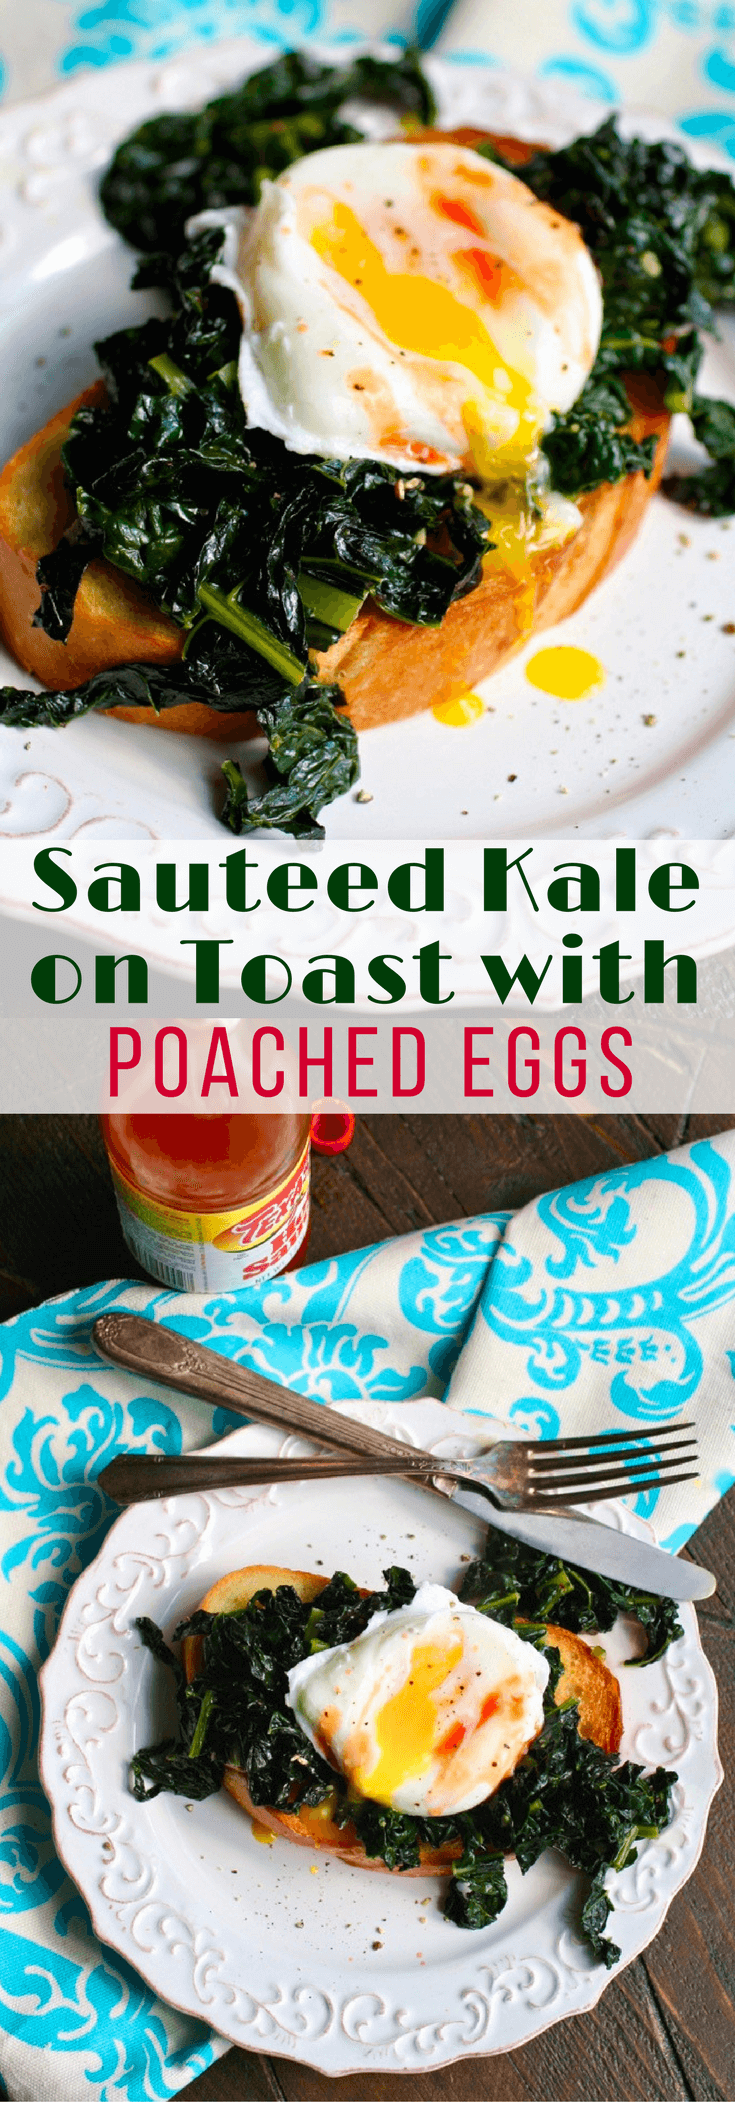 Sauteed Kale on Toast with Poached Eggs makes a scrumptious breakfast dish. You'll love how easy it is to make!